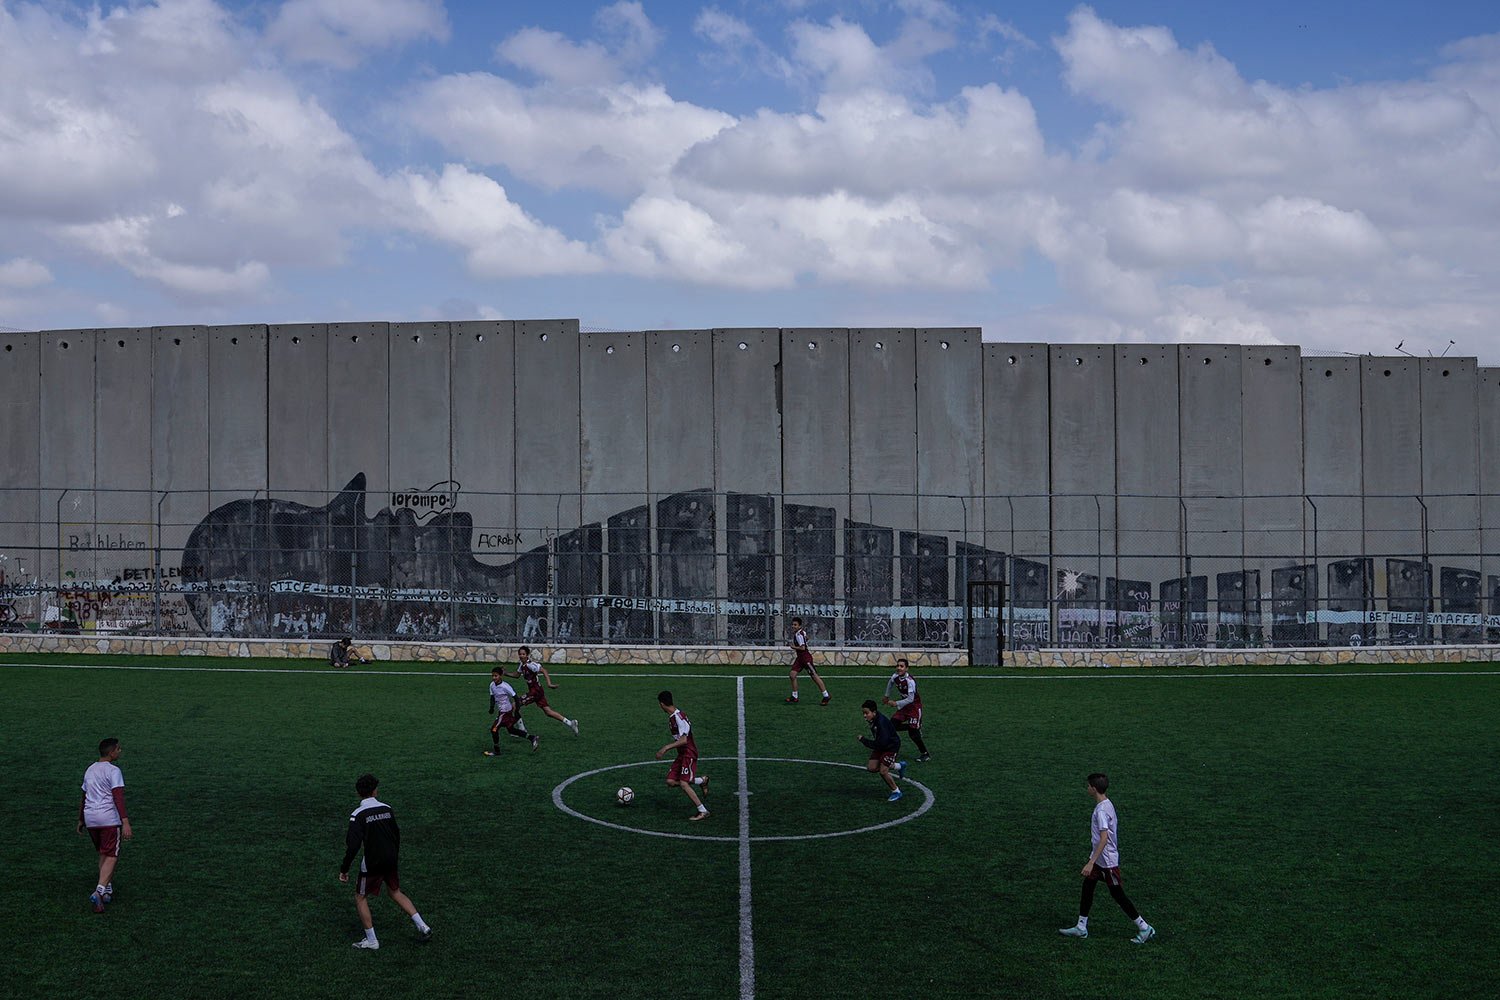  Palestinian youth play soccer in a field next to Israel's separation barrier in Aida Refugee camp, in the West Bank city of Bethlehem, Wednesday, March 8, 2023. (AP Photo/Mahmoud Illean) 